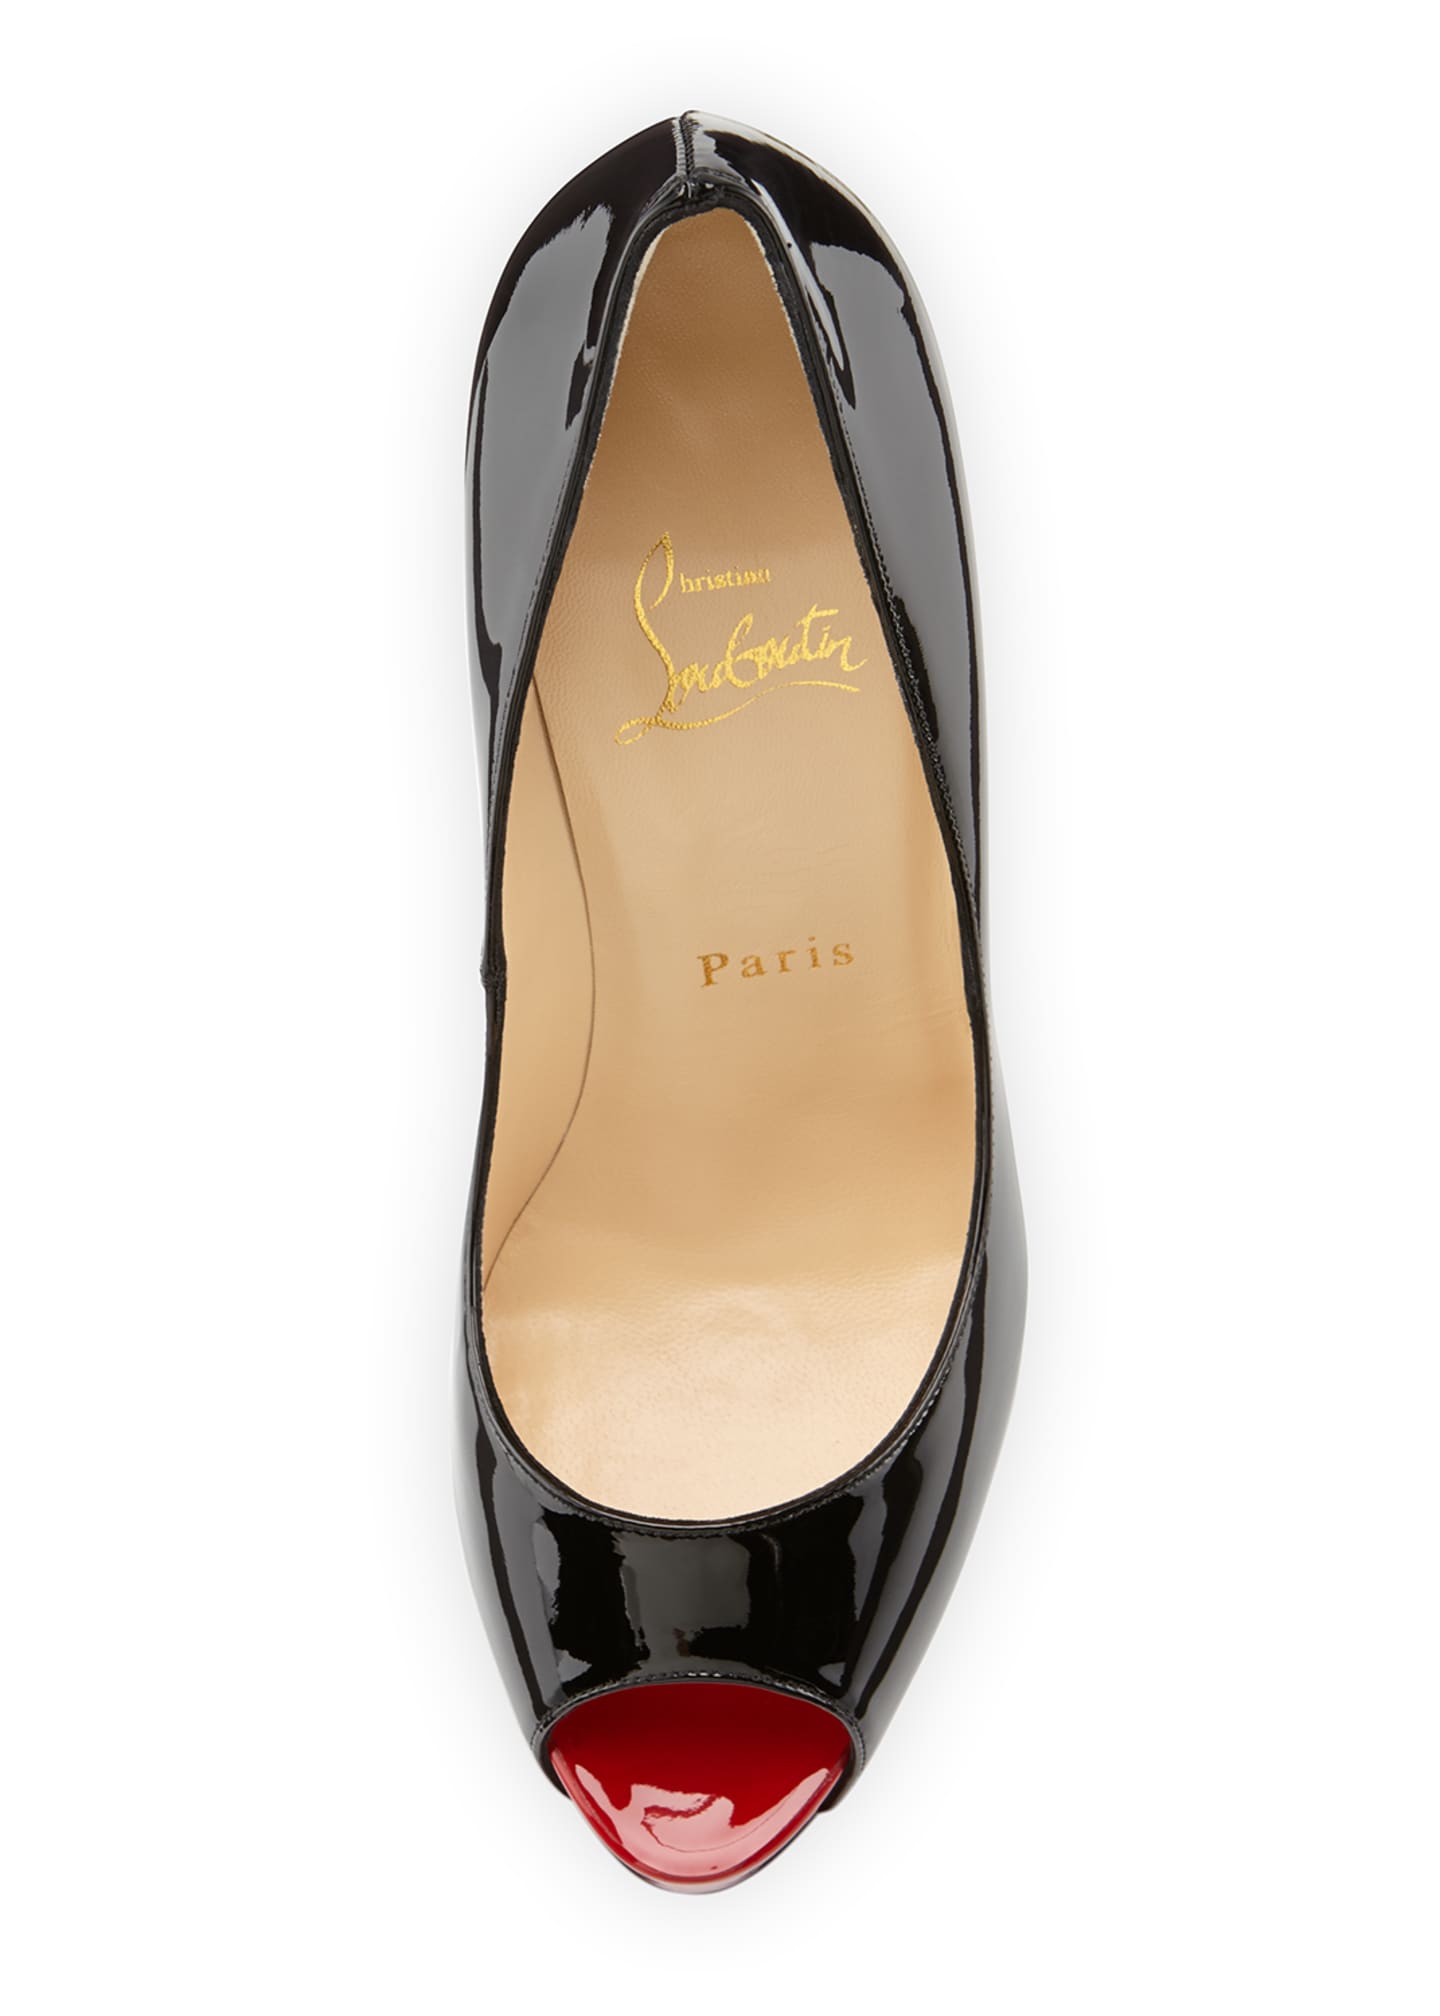 Christian Louboutin New Very Prive Patent Red Sole Pump - Bergdorf Goodman